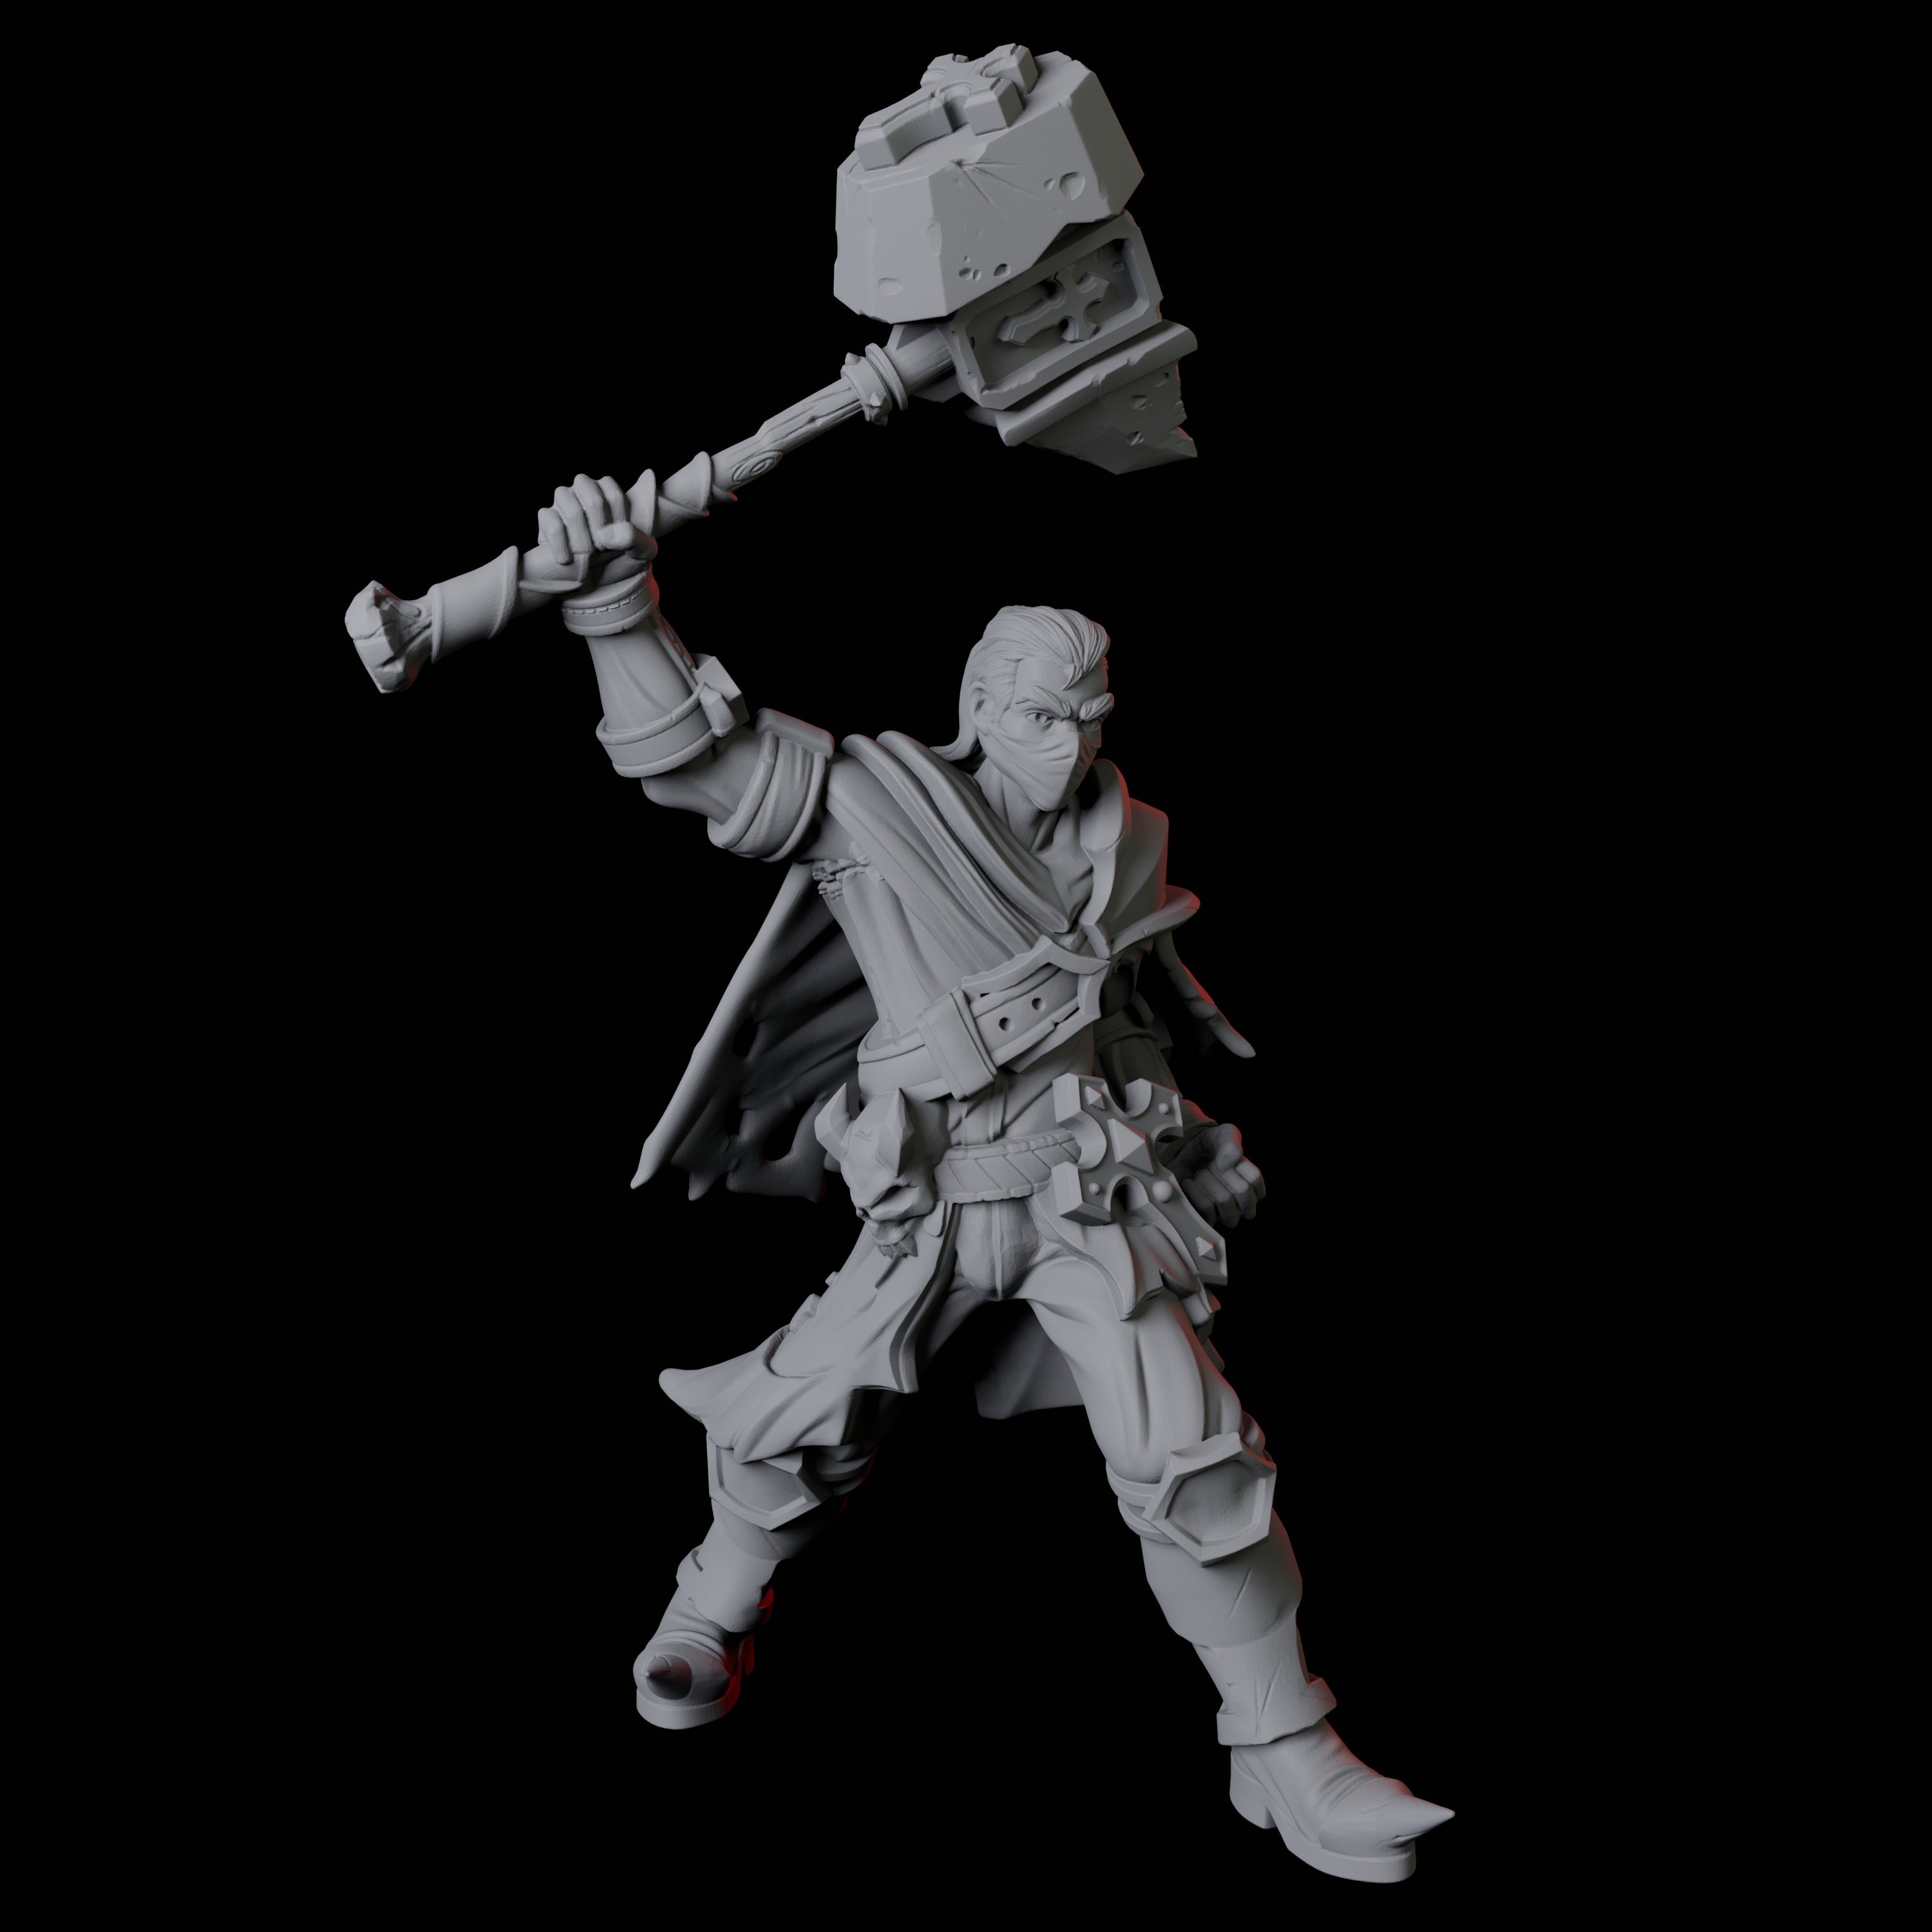 Band of Armed Ruffians Miniature for Dungeons and Dragons, Pathfinder or other TTRPGs